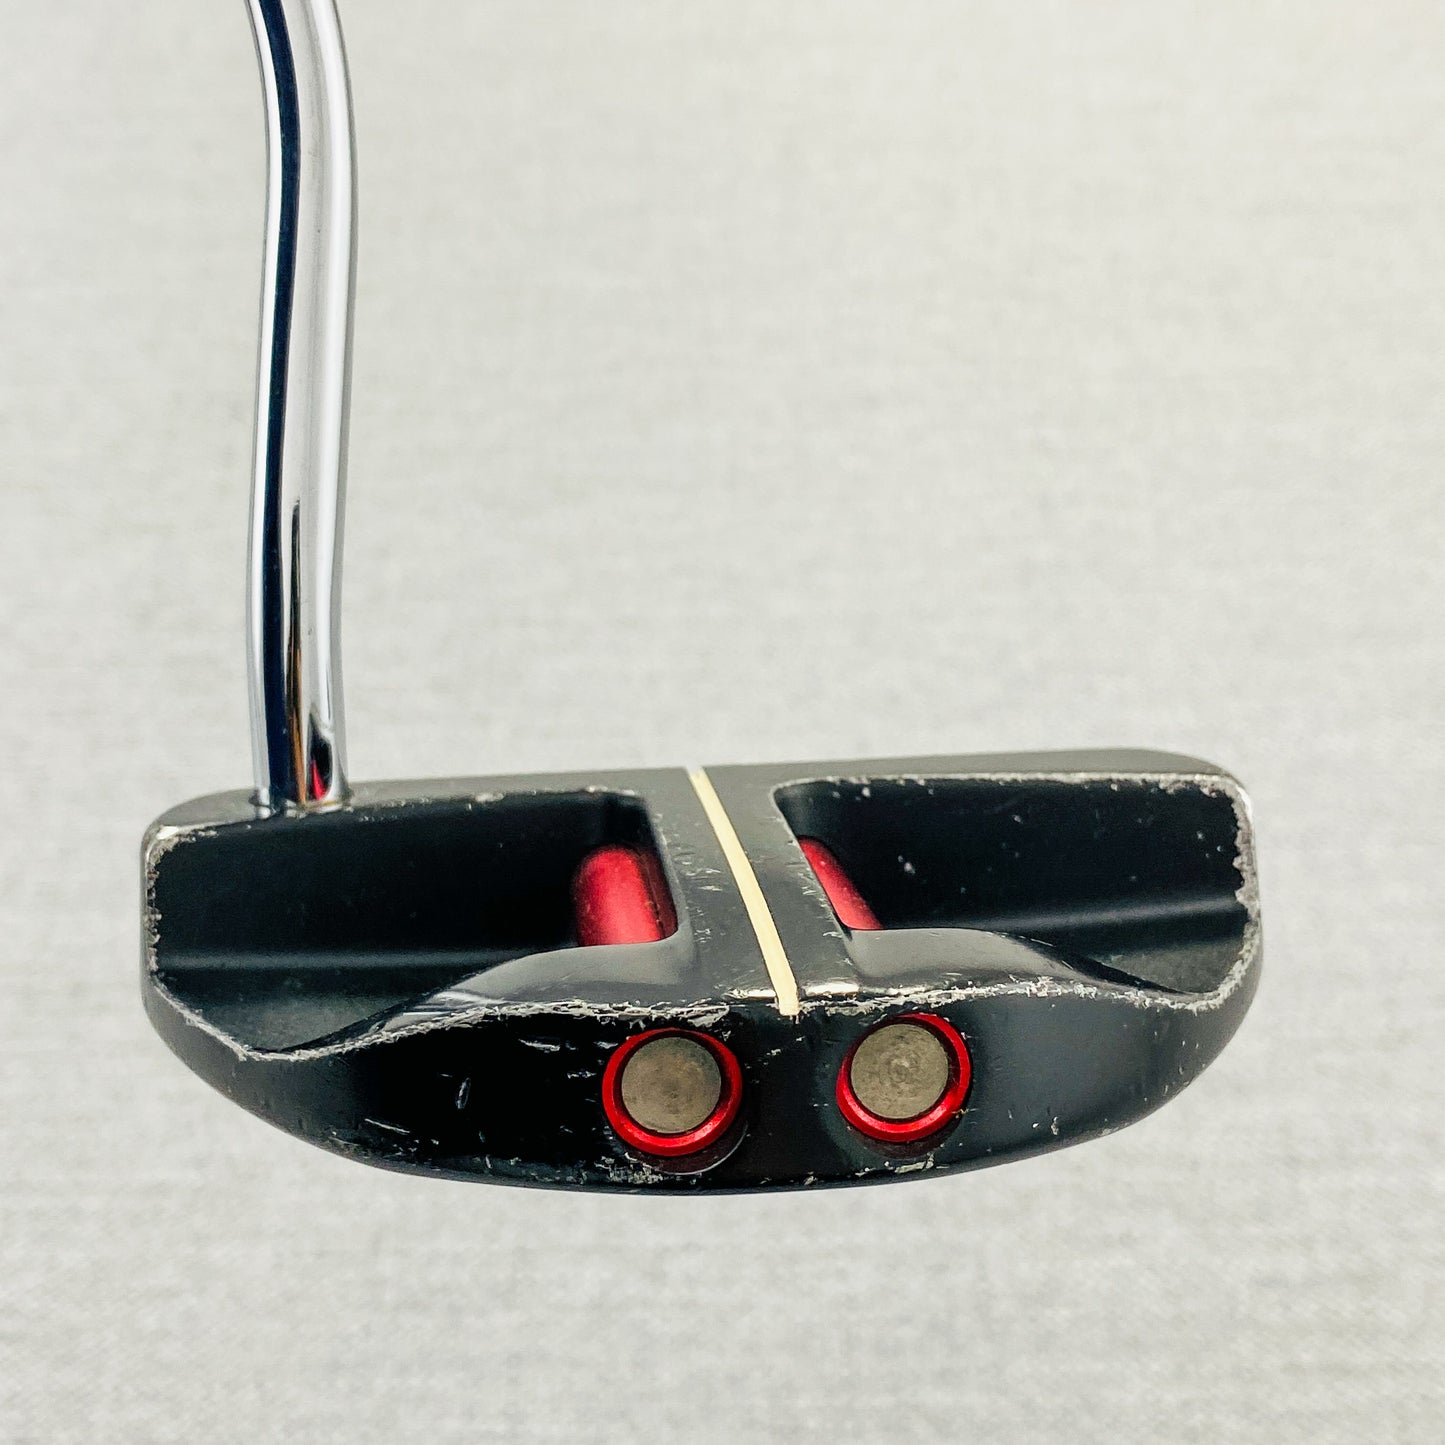 TaylorMade Rossa Monza Putter. 33 inch - Average Condition # GP242